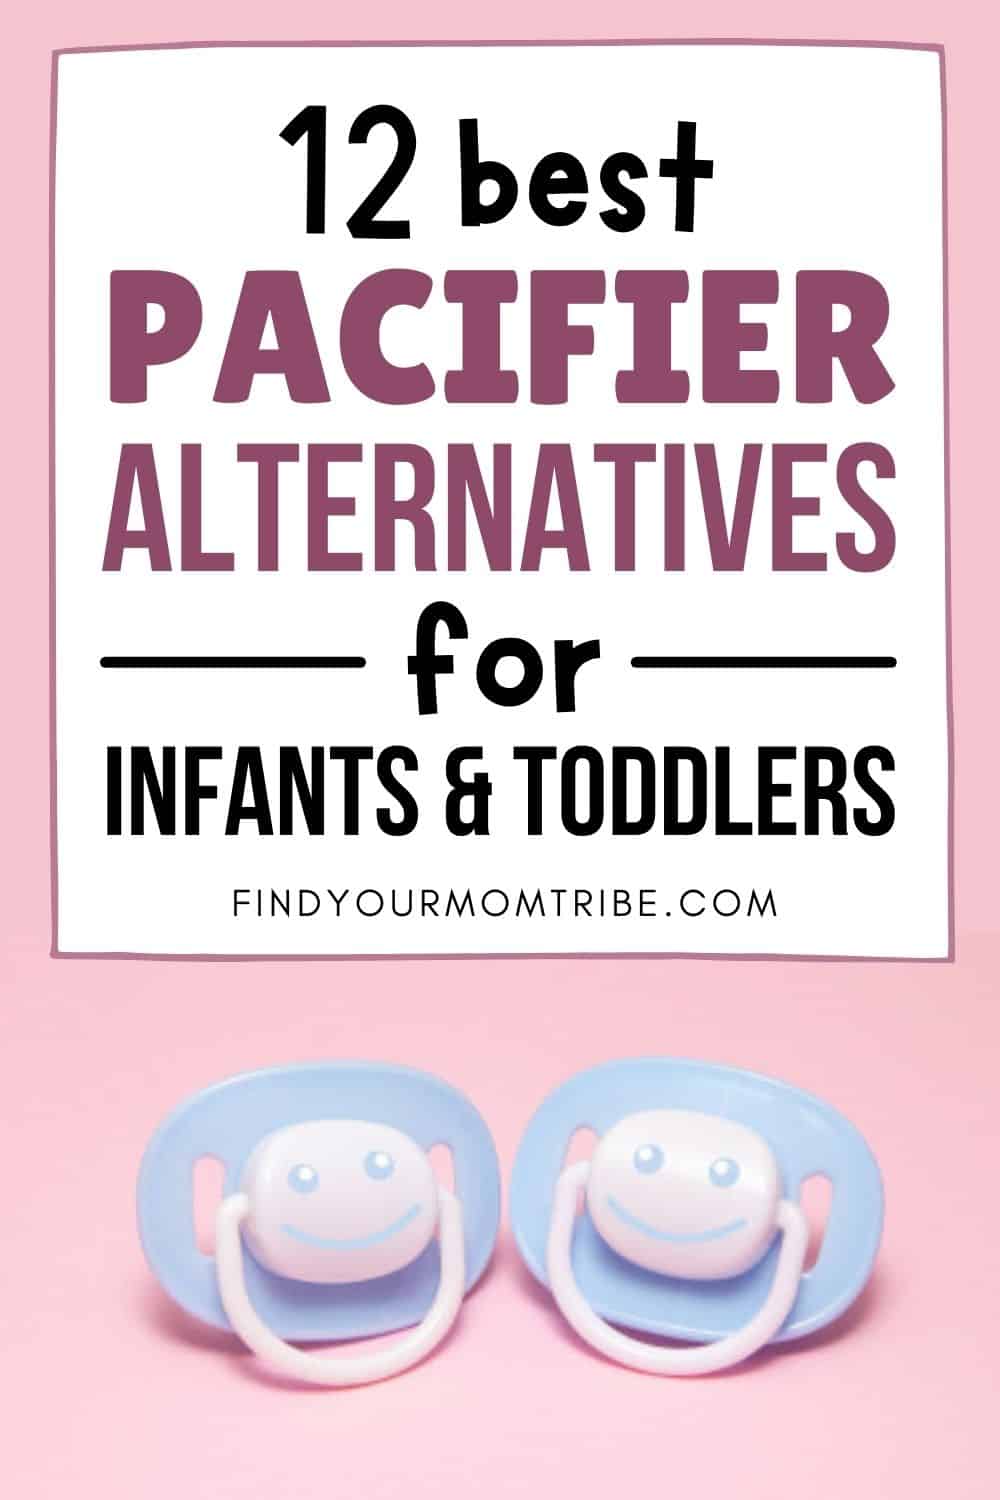 Top 12 Excellent Pacifier Alternatives For Infants and Toddlers Pinterest